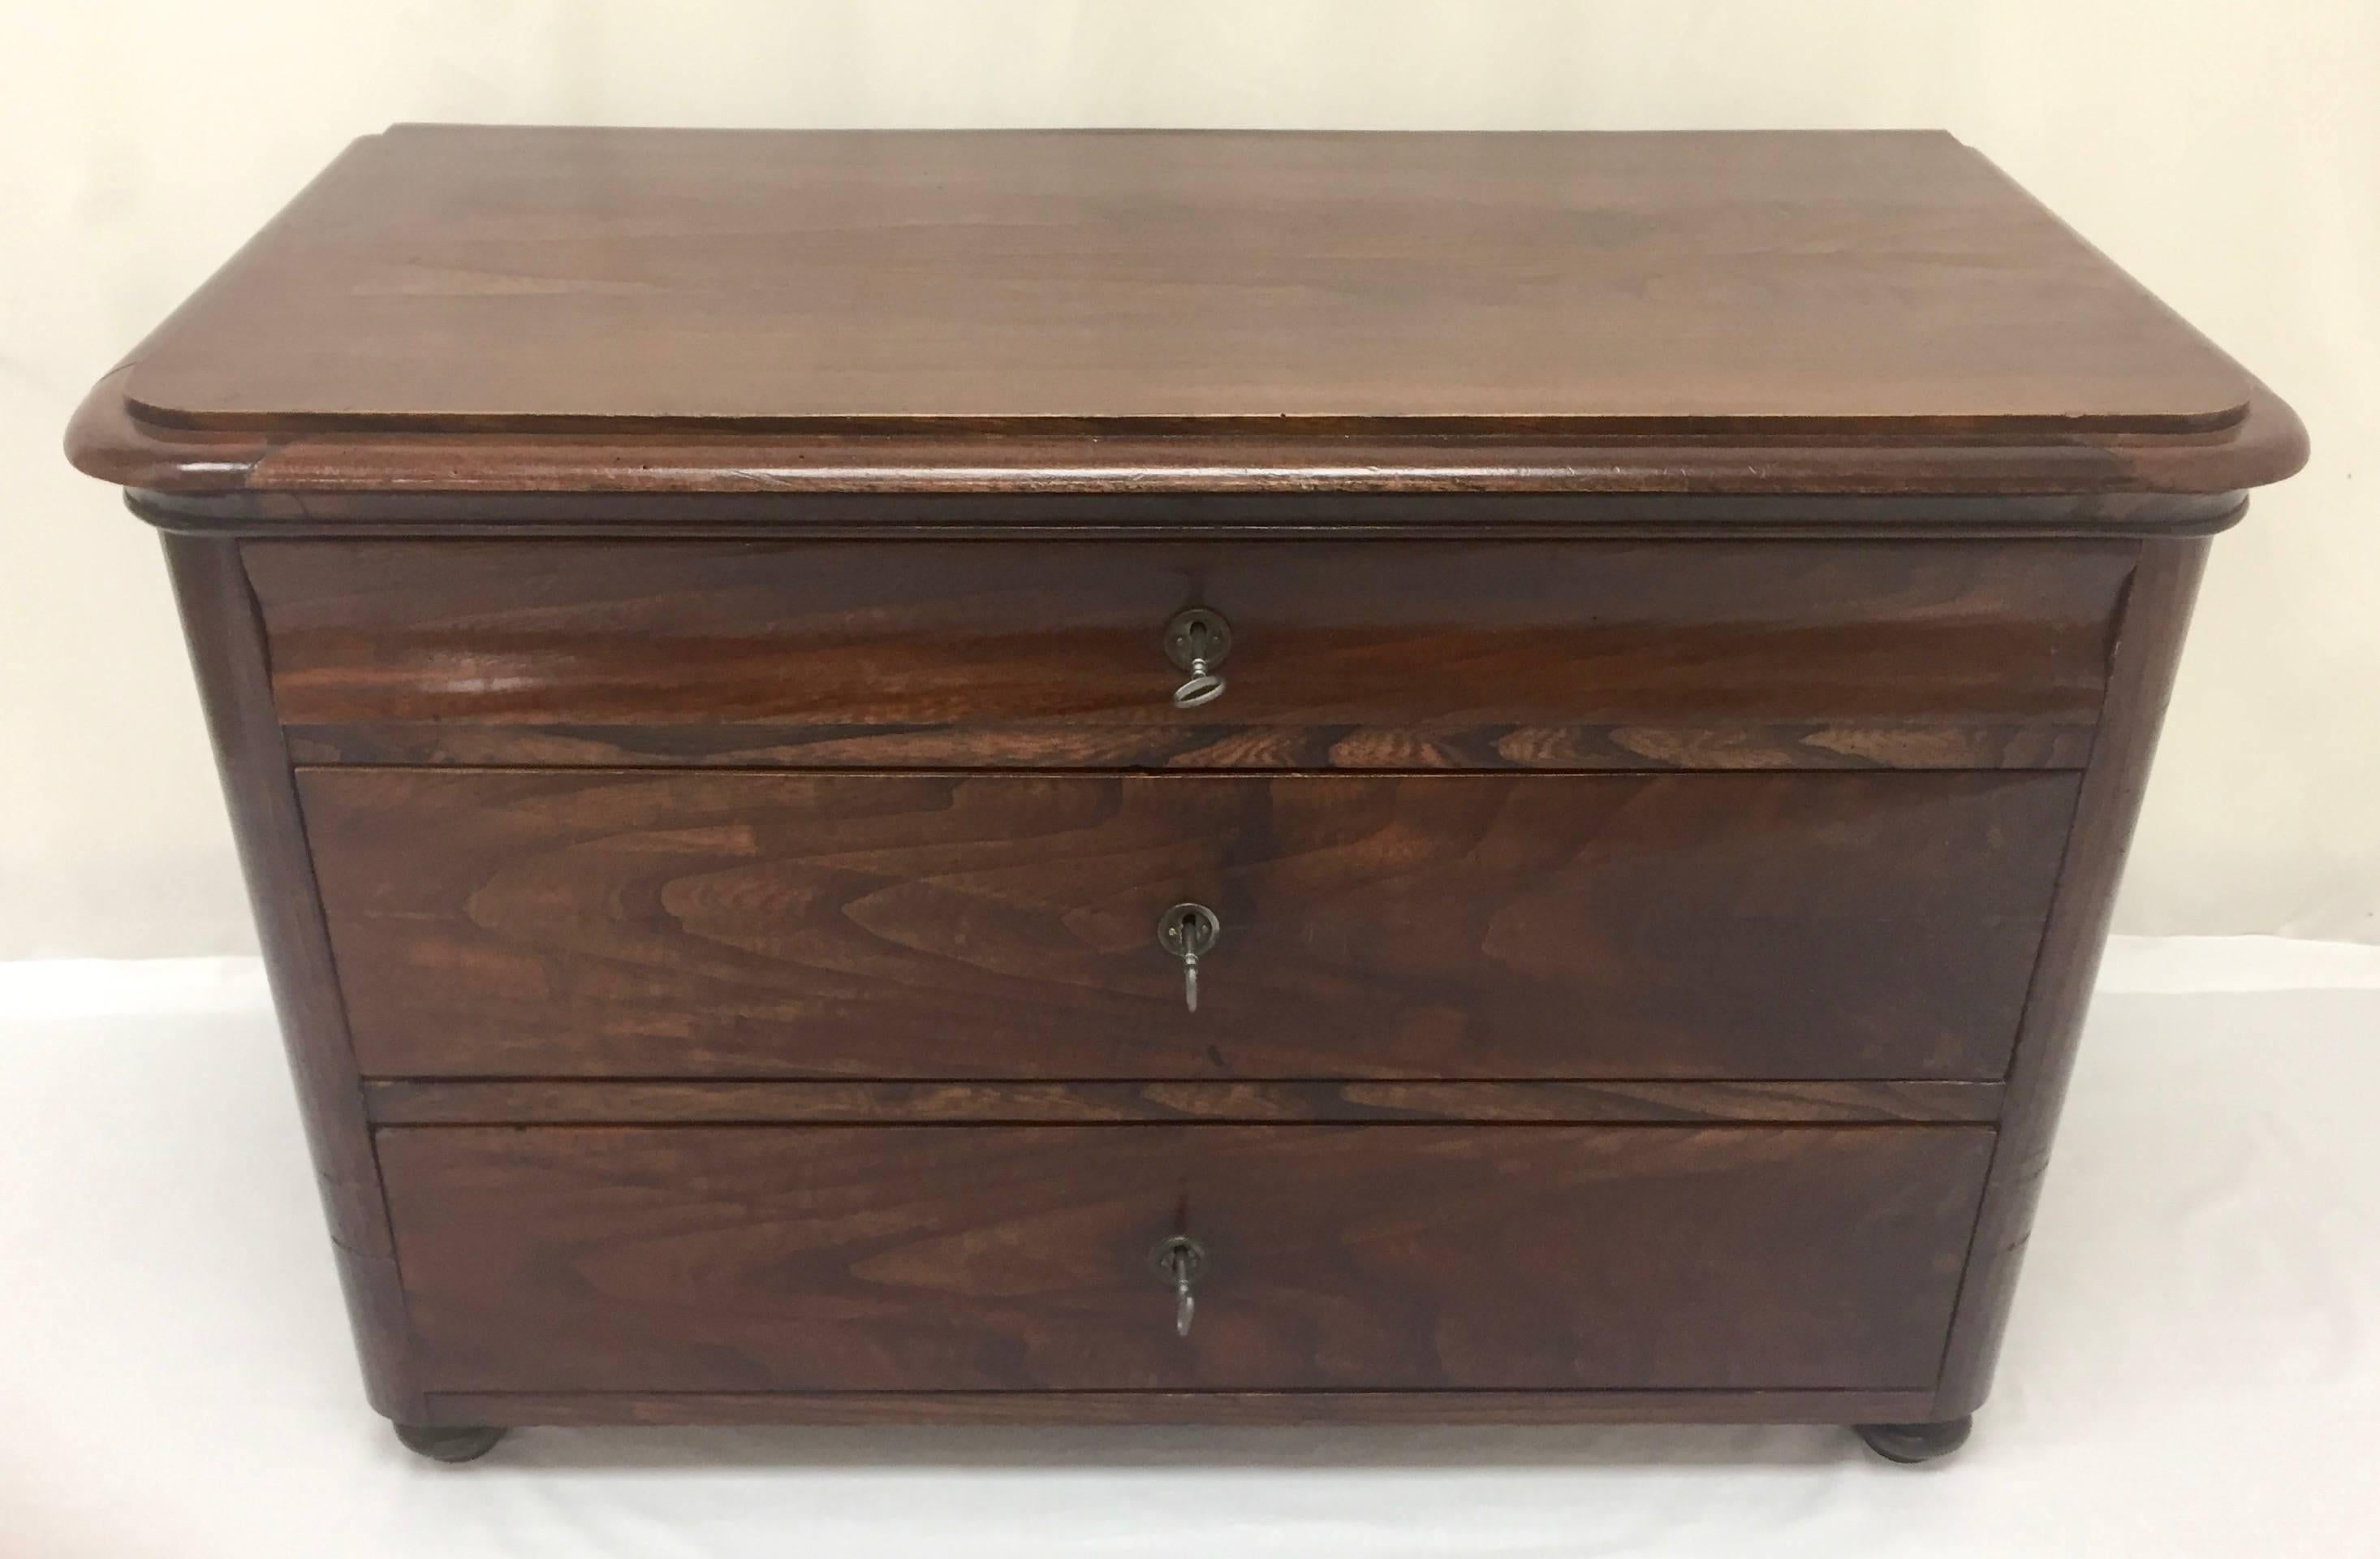 This handsome little French chest of drawers or commode is made of book-matched walnut using yellow pine as the secondary wood. The top drawer bears the typical curvature of the Louis-Philippe style but its interior has something special. At the